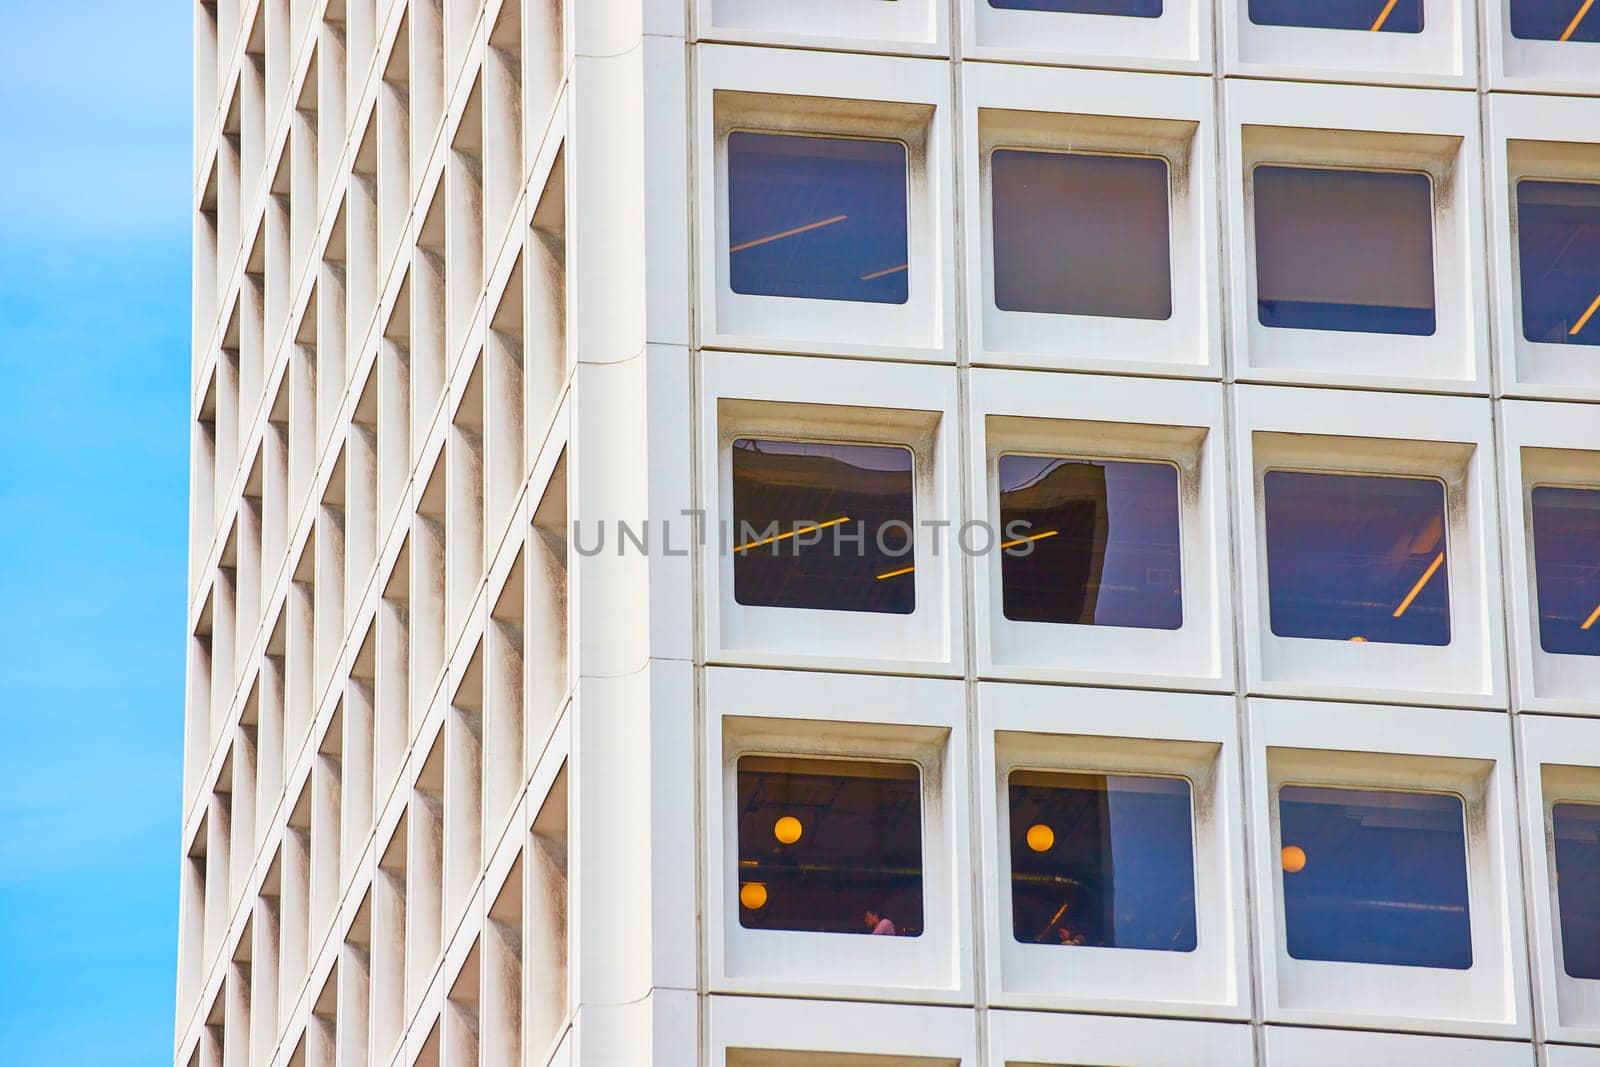 Image of Square windows on skyscraper zoomed in view on bright blue sky day with people in office